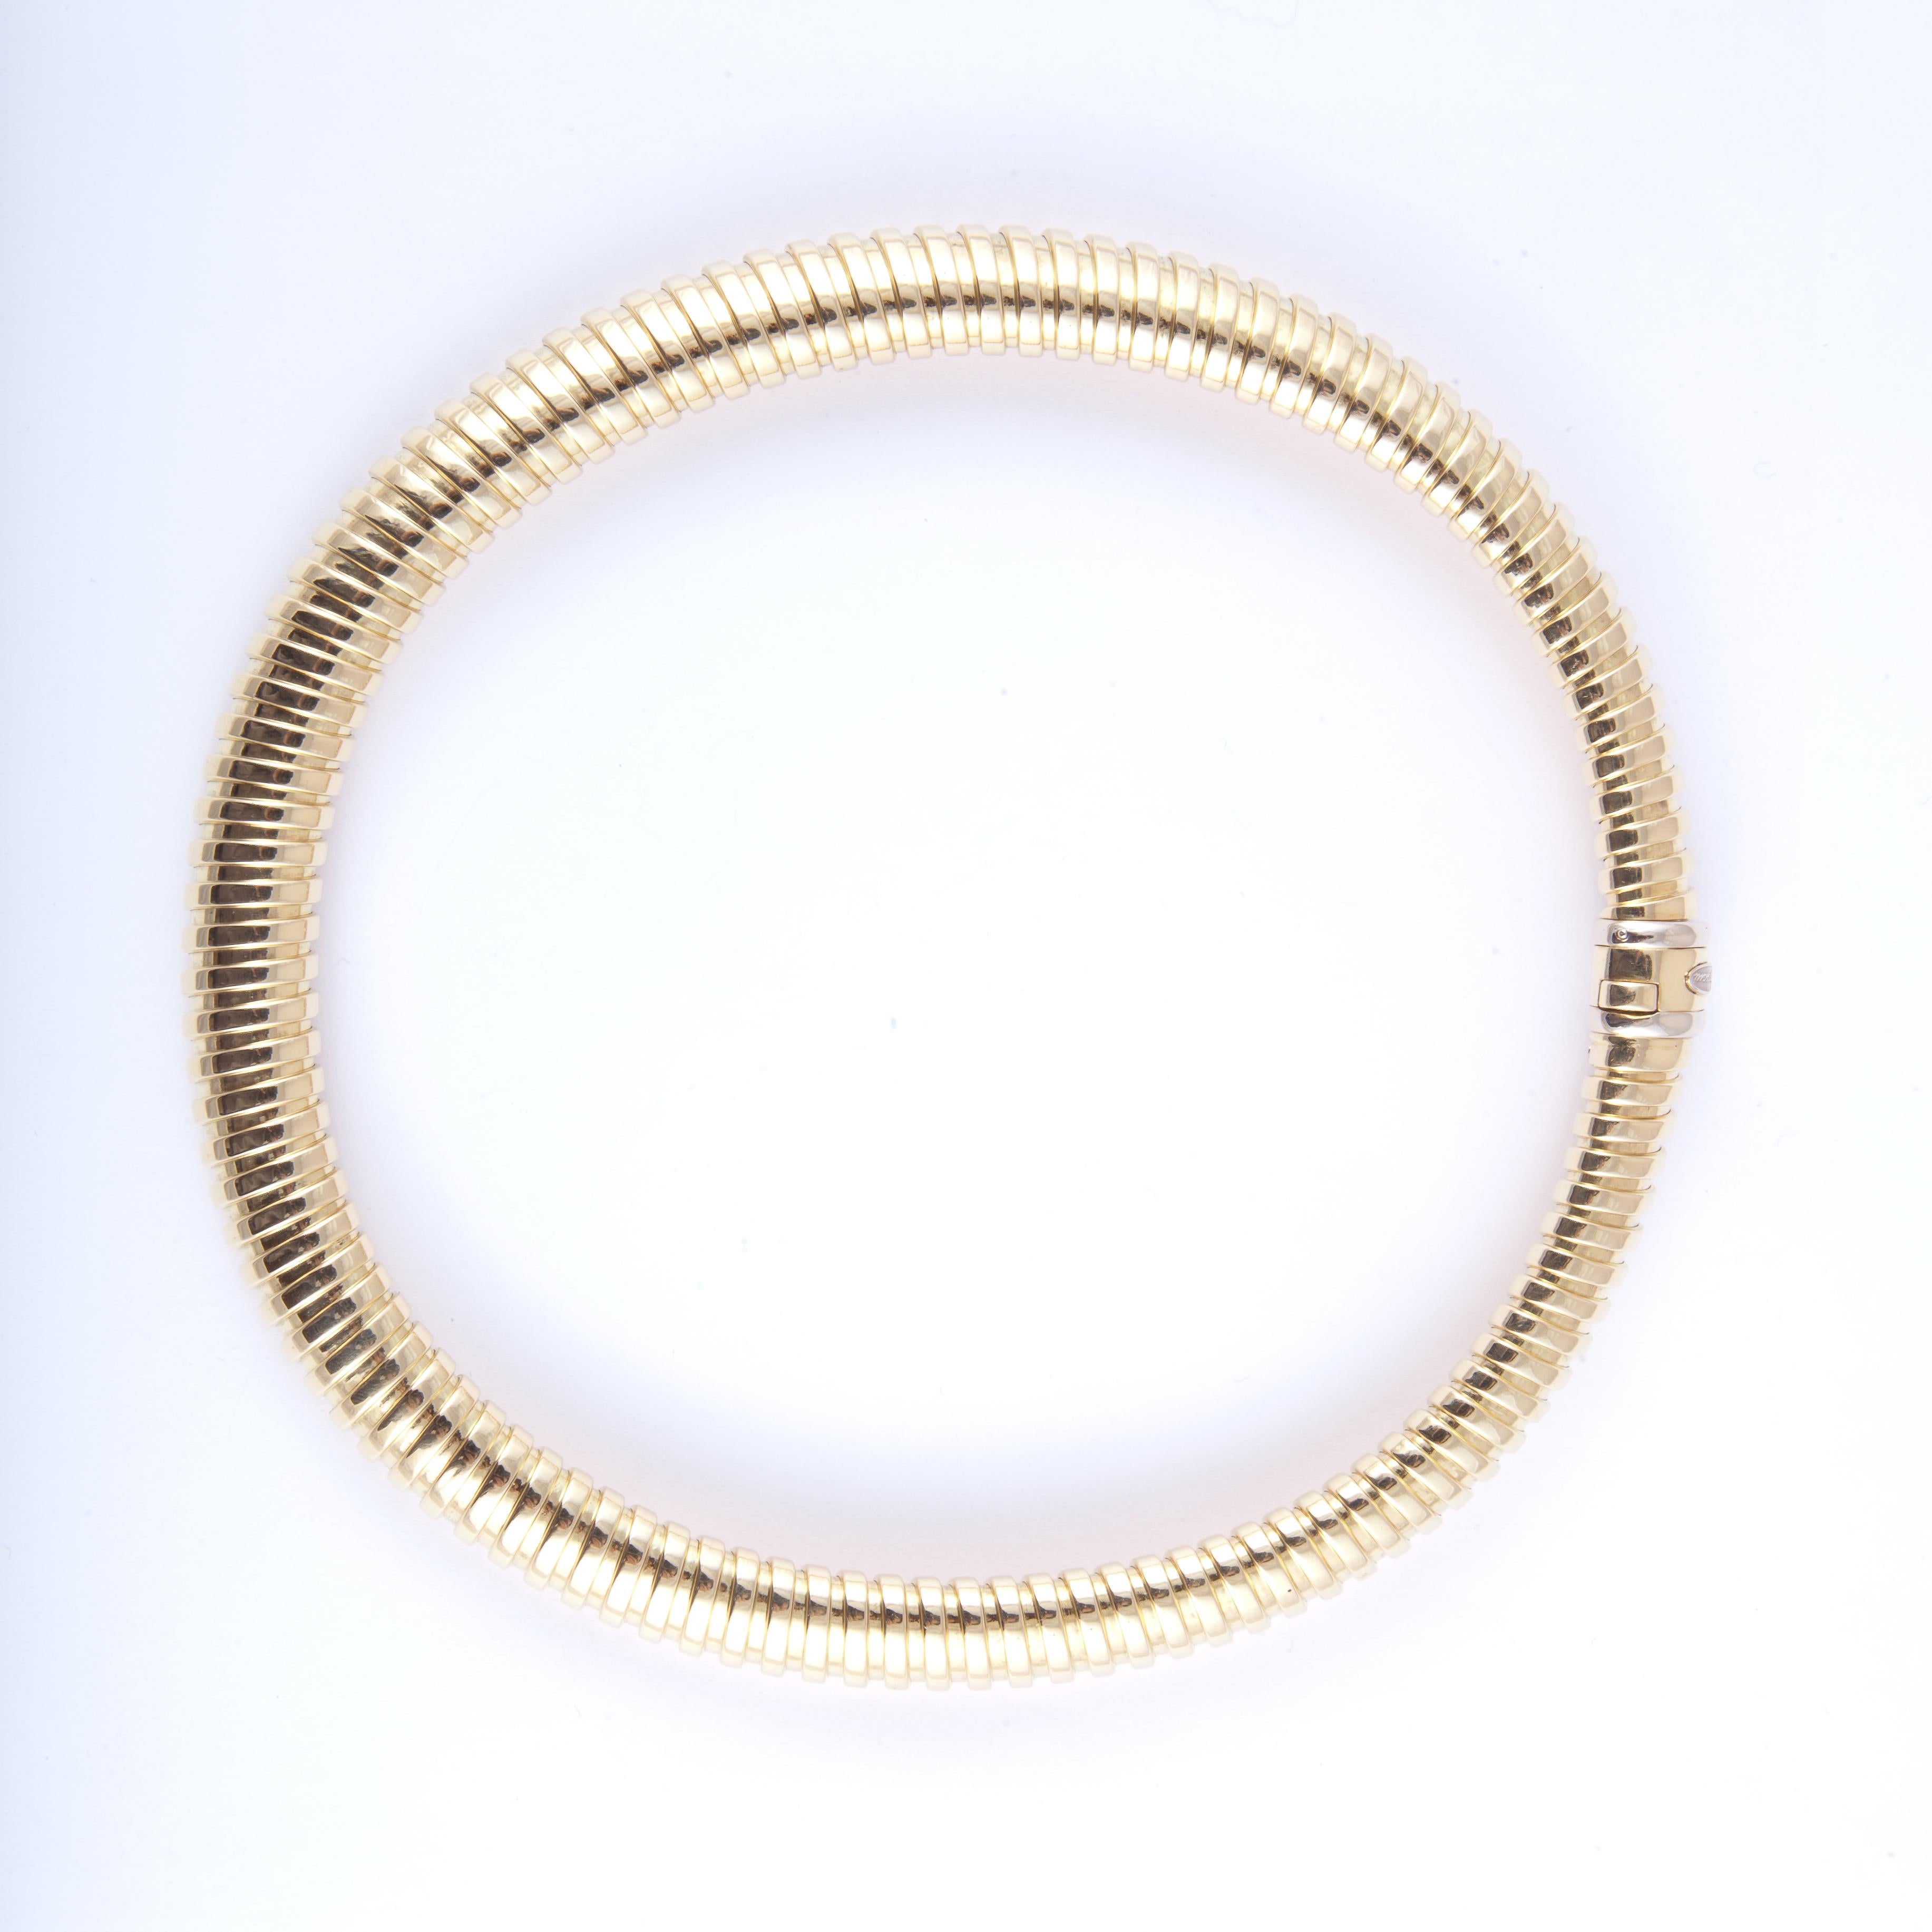 Bersoni tubogas style necklace in 18K yellow gold with a tongue insert closure.  The necklace measures 19 inches in length and 1/2 inch wide.  Necklace has very nice weight and lays great on the neck.